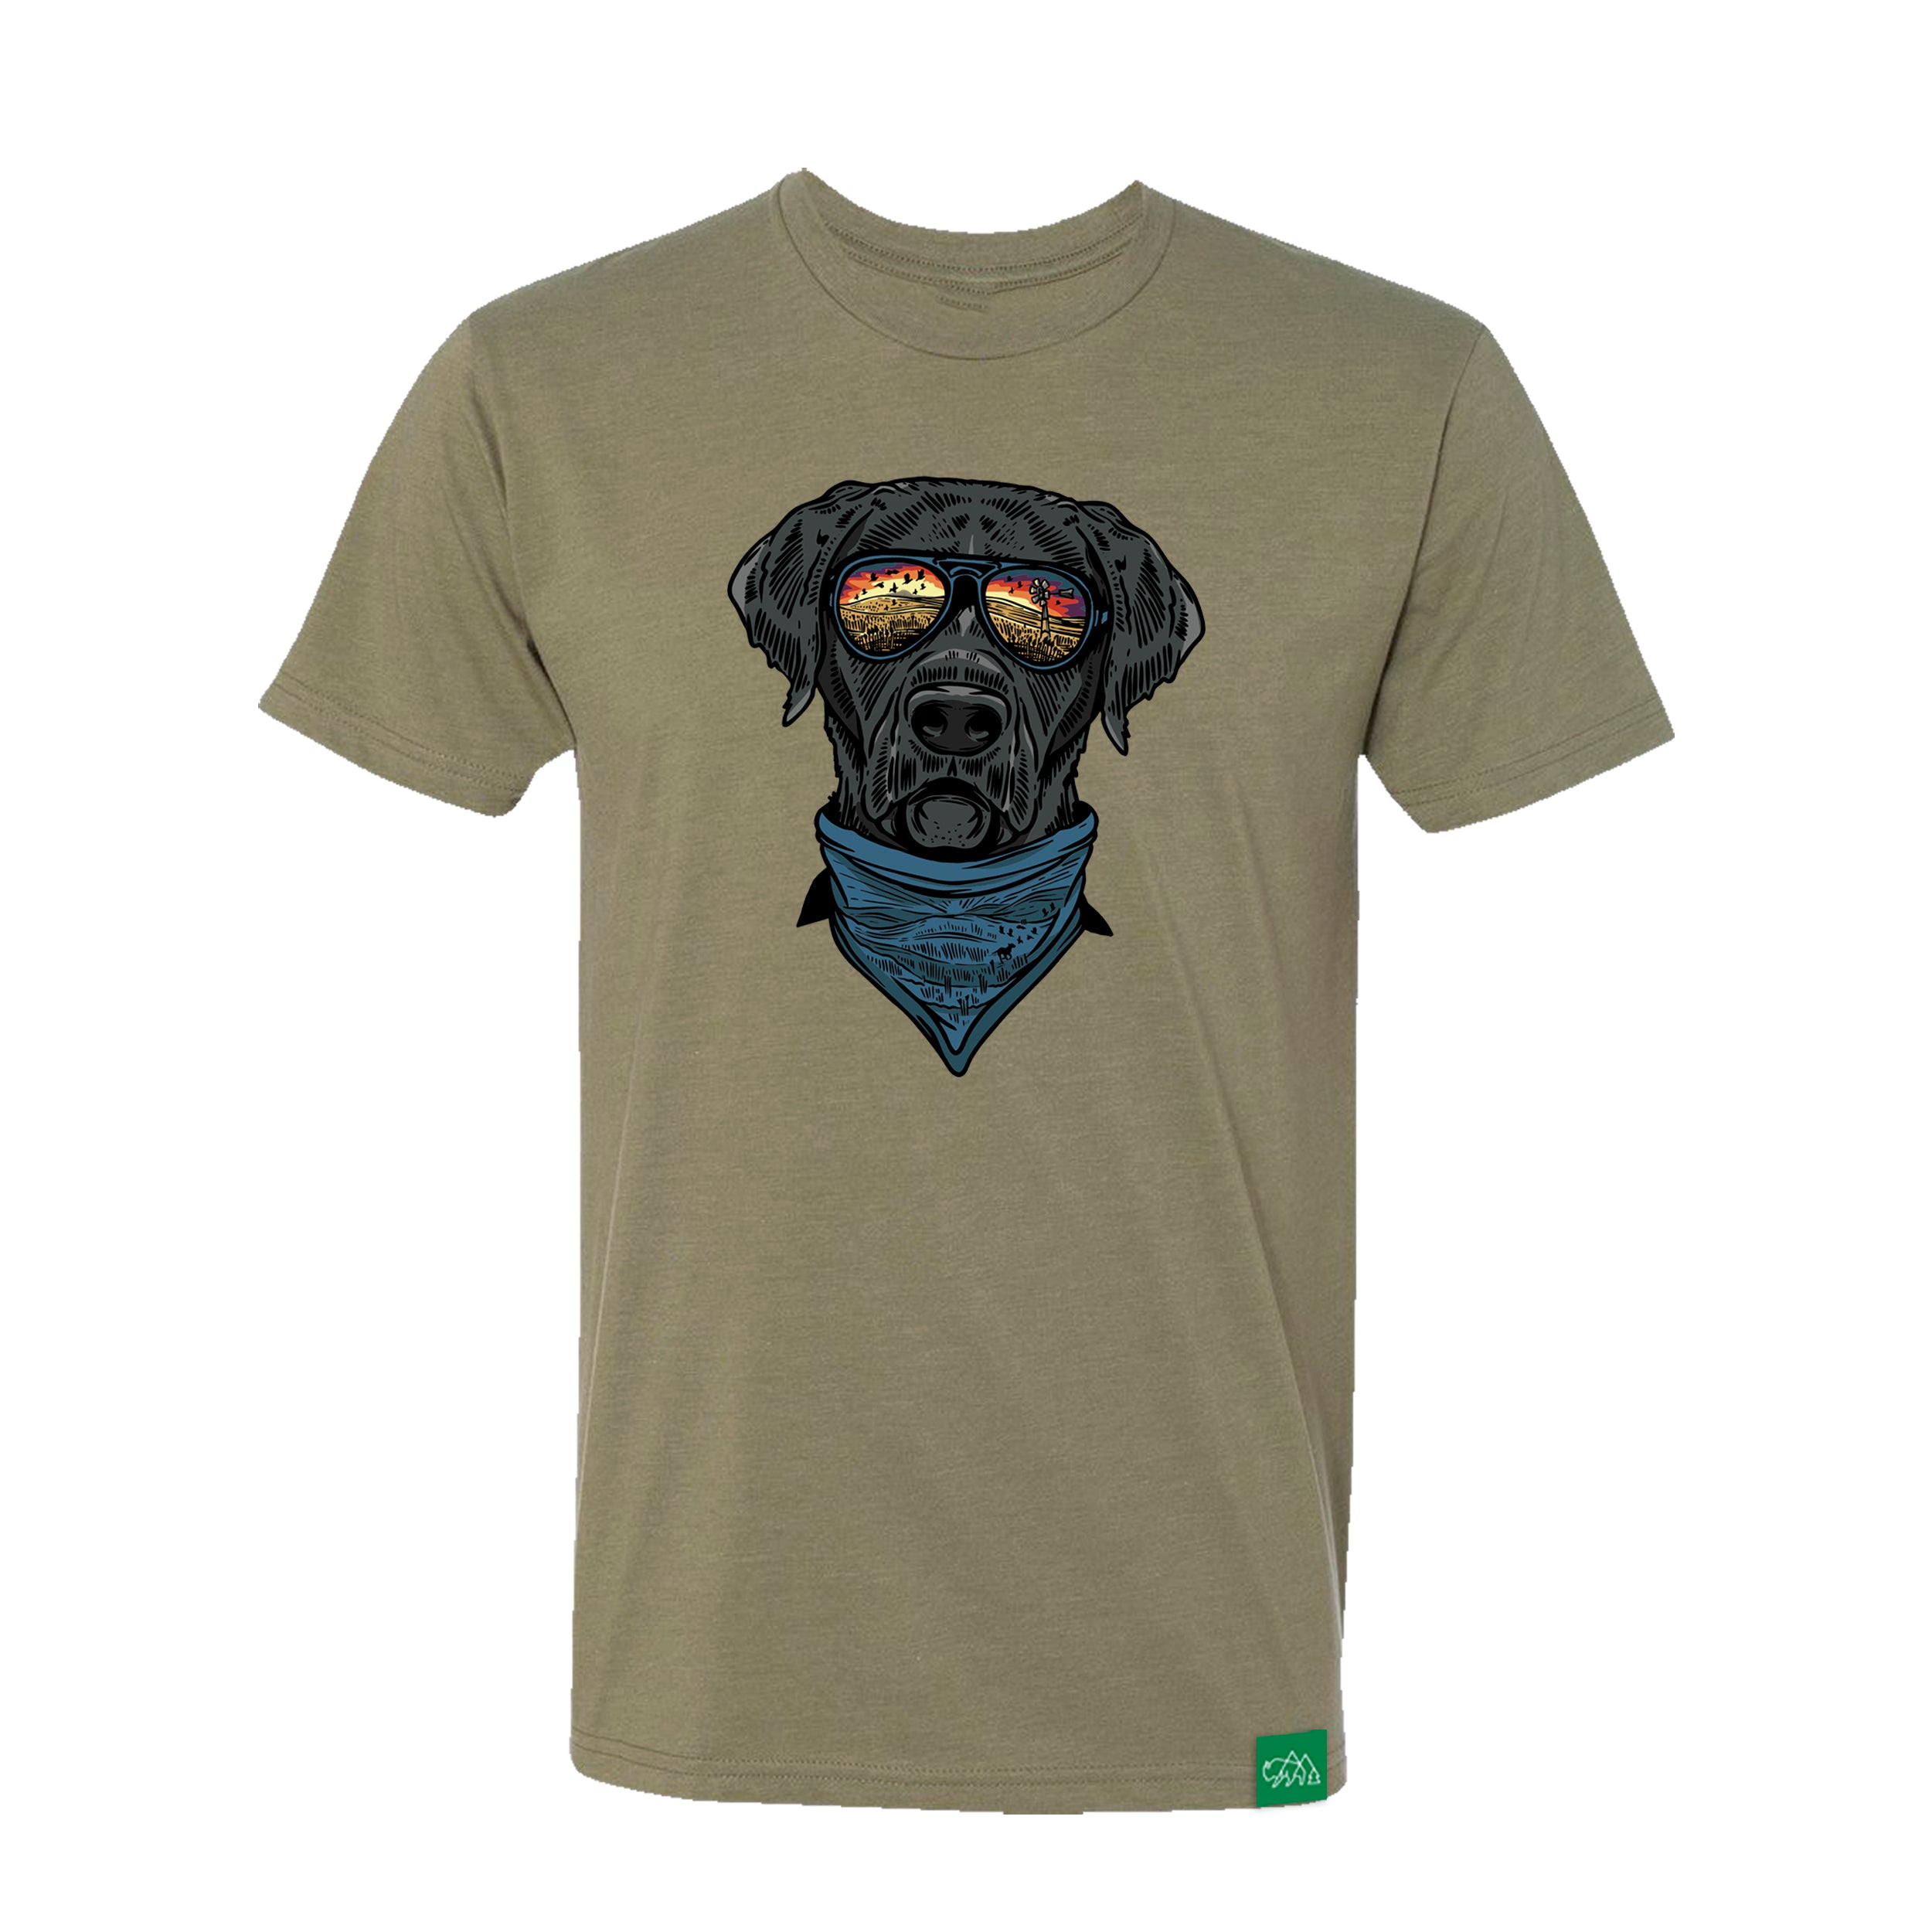 Scout's Obsession T-Shirt